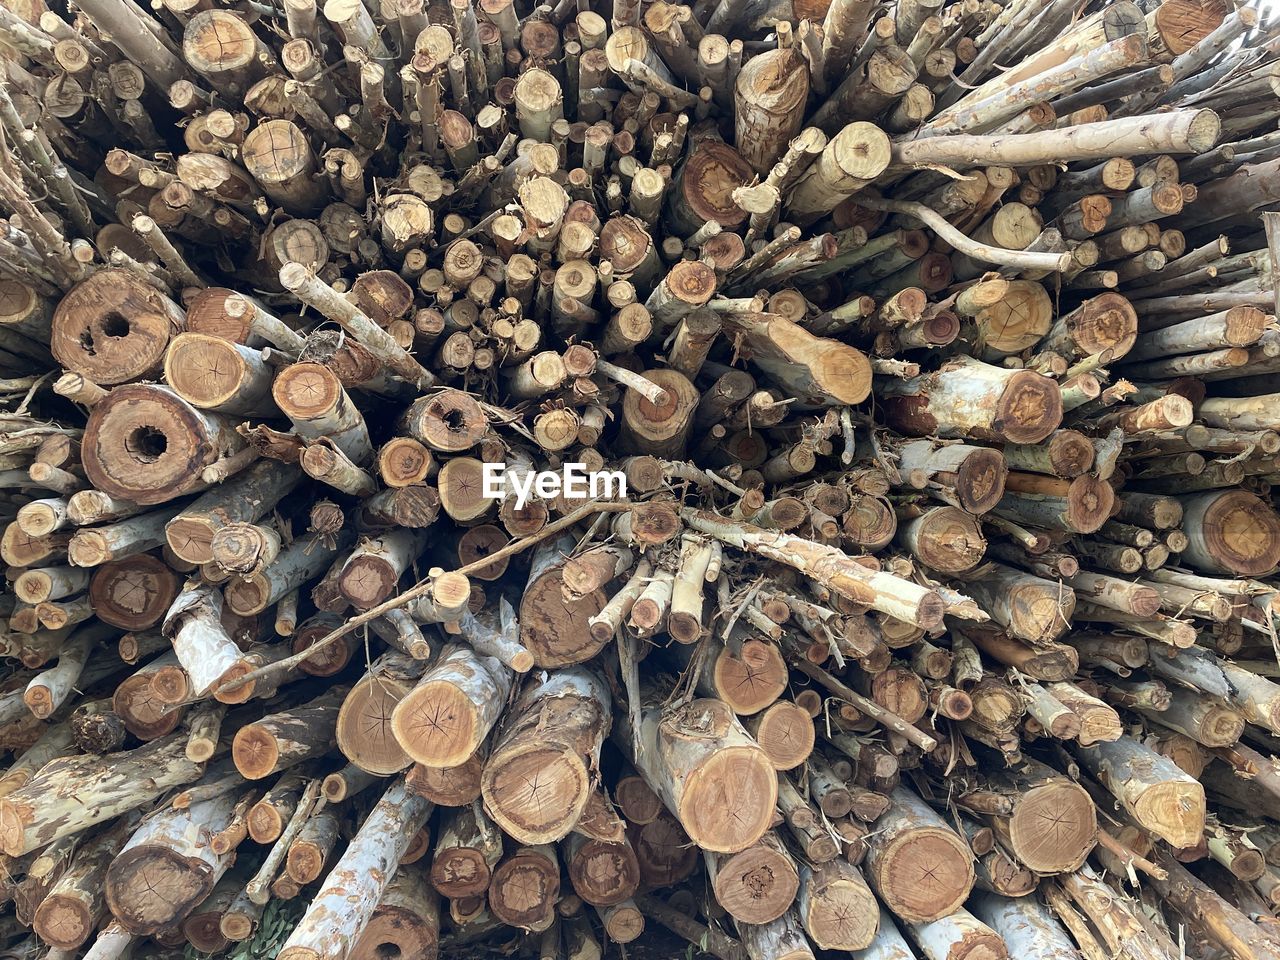 large group of objects, log, abundance, firewood, lumber industry, deforestation, timber, tree, wood, forest, trunk, full frame, backgrounds, environmental issues, logging, power generation, heap, woodpile, environmental damage, branch, fossil fuel, no people, nature, soil, close-up, leaf, day, lumber, pattern, outdoors, textured